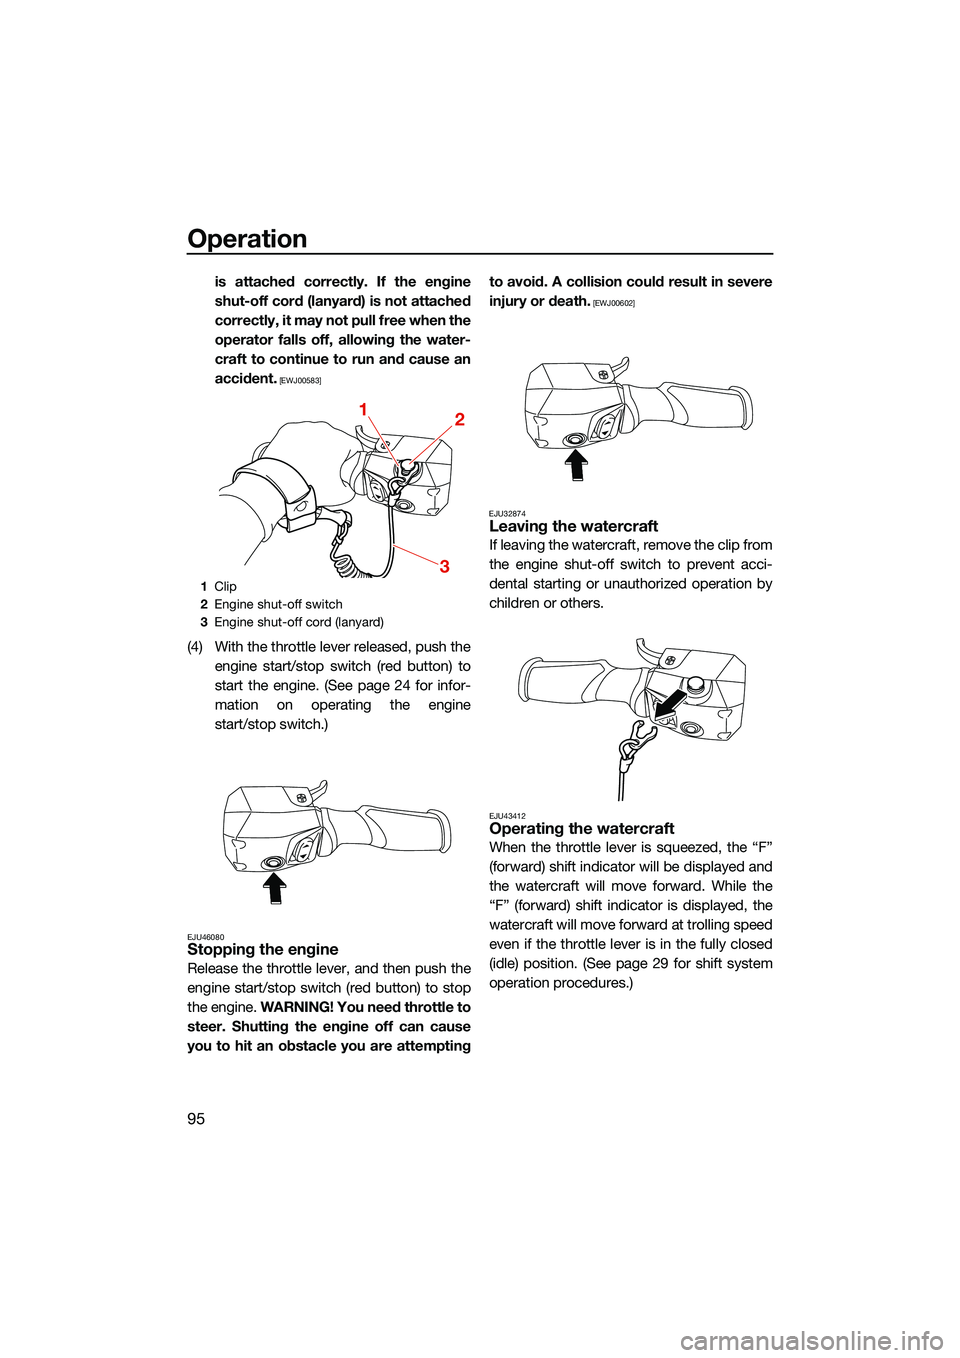 YAMAHA FX HO CRUISER 2022  Owners Manual Operation
95
is attached correctly. If the engine
shut-off cord (lanyard) is not attached
correctly, it may not pull free when the
operator falls off, allowing the water-
craft to continue to run and 